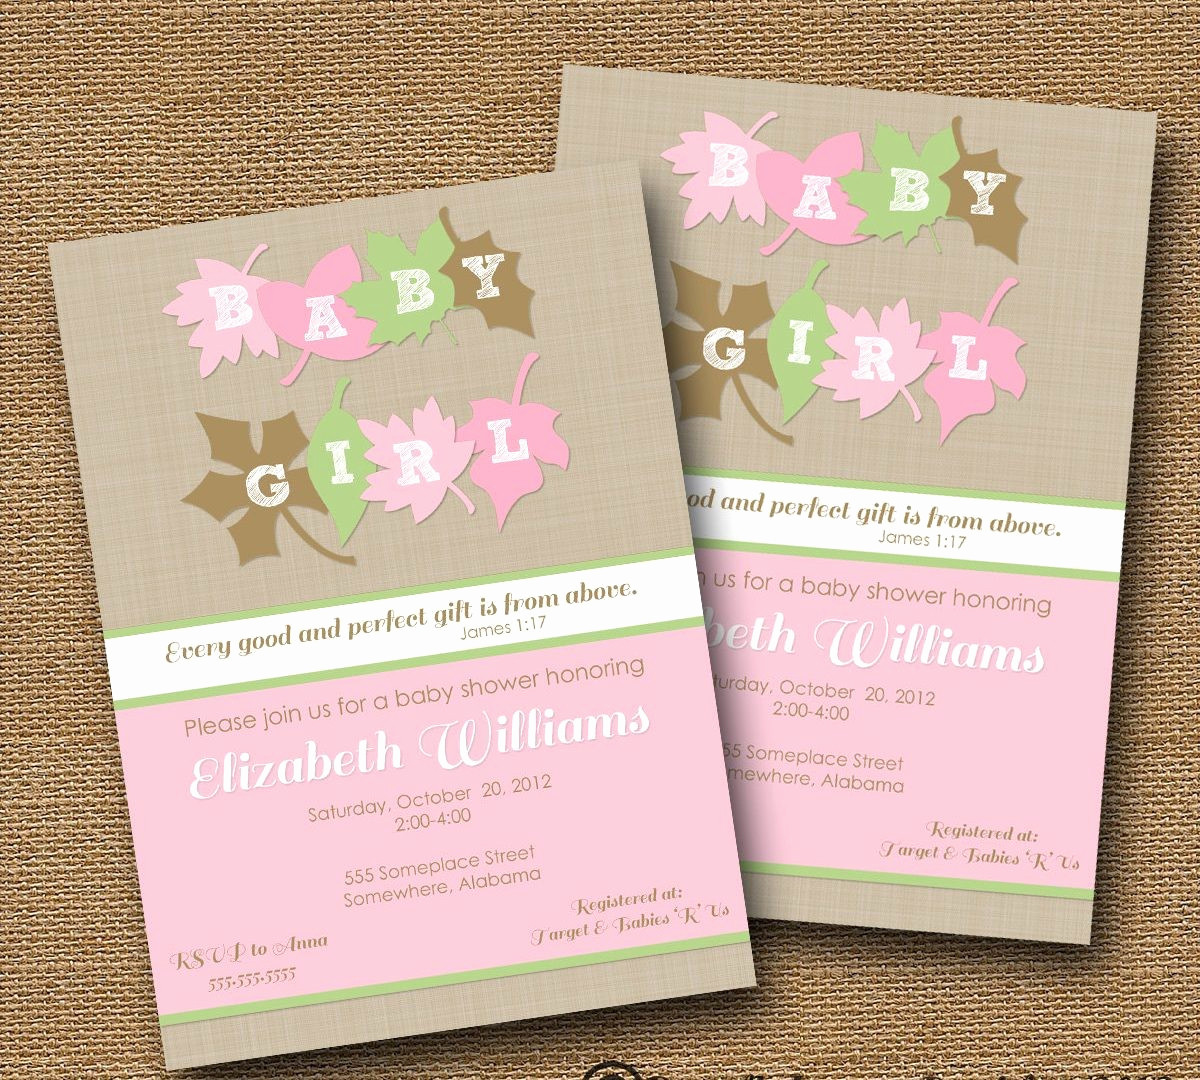 Full Size of Baby Shower:63+ Delightful Cheap Baby Shower Invitations Image Inspirations Cheap Baby Shower Invitations As Well As Arreglos Para Baby Shower With Baby Shower Props Plus Adornos De Baby Shower Together With Baby Shower Para Niño